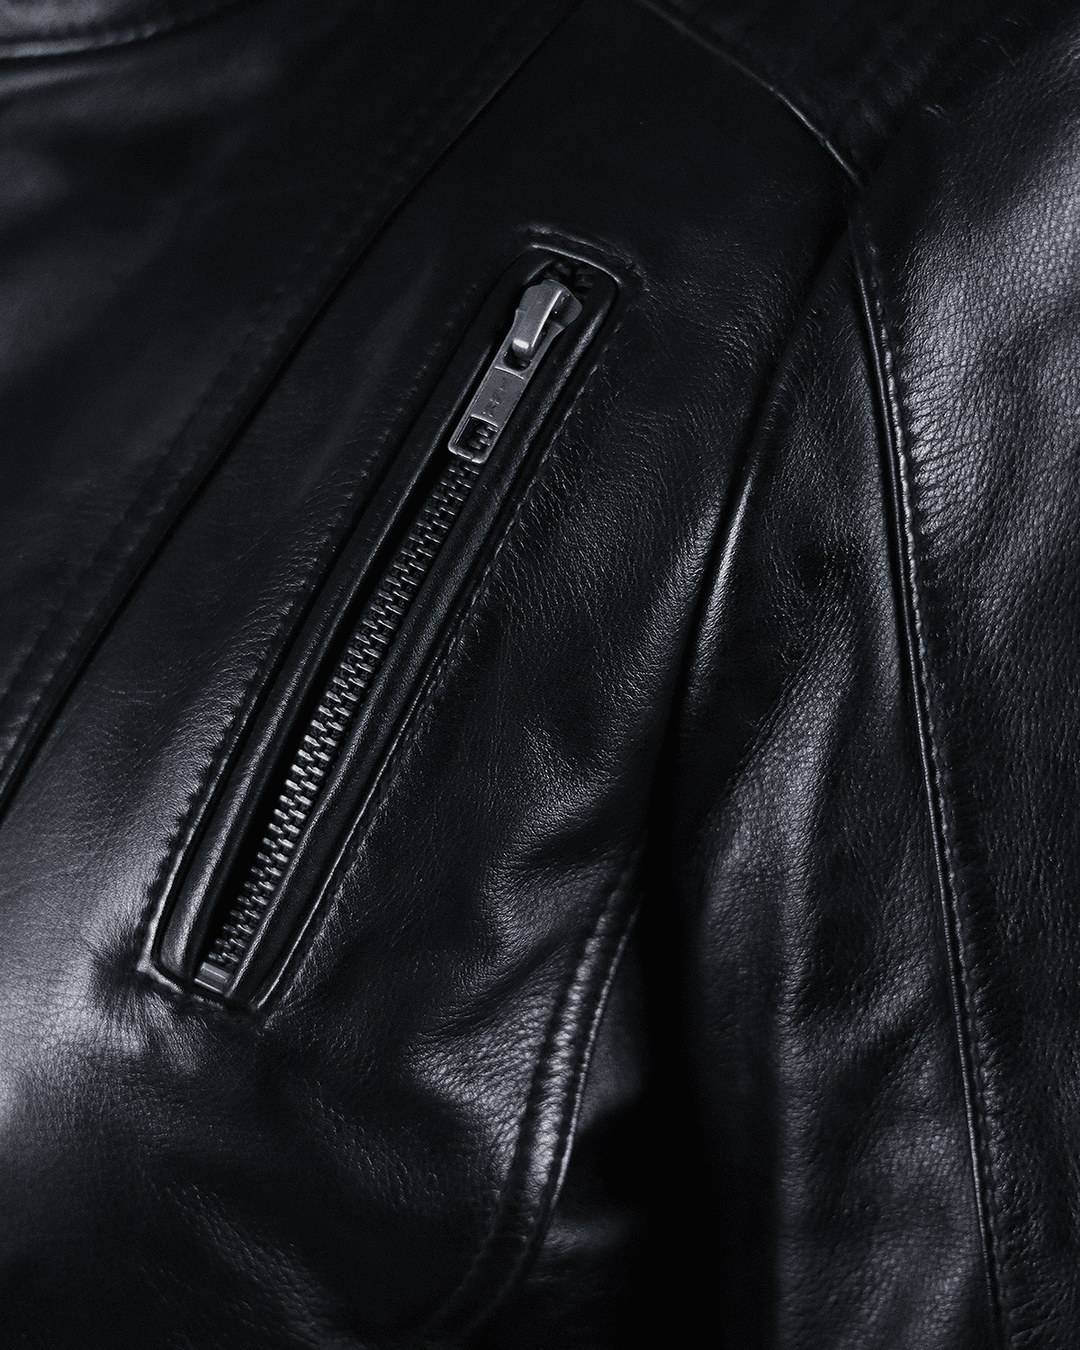 Wade Leather Motorcycle Jacket - Closeup Leather Grains View